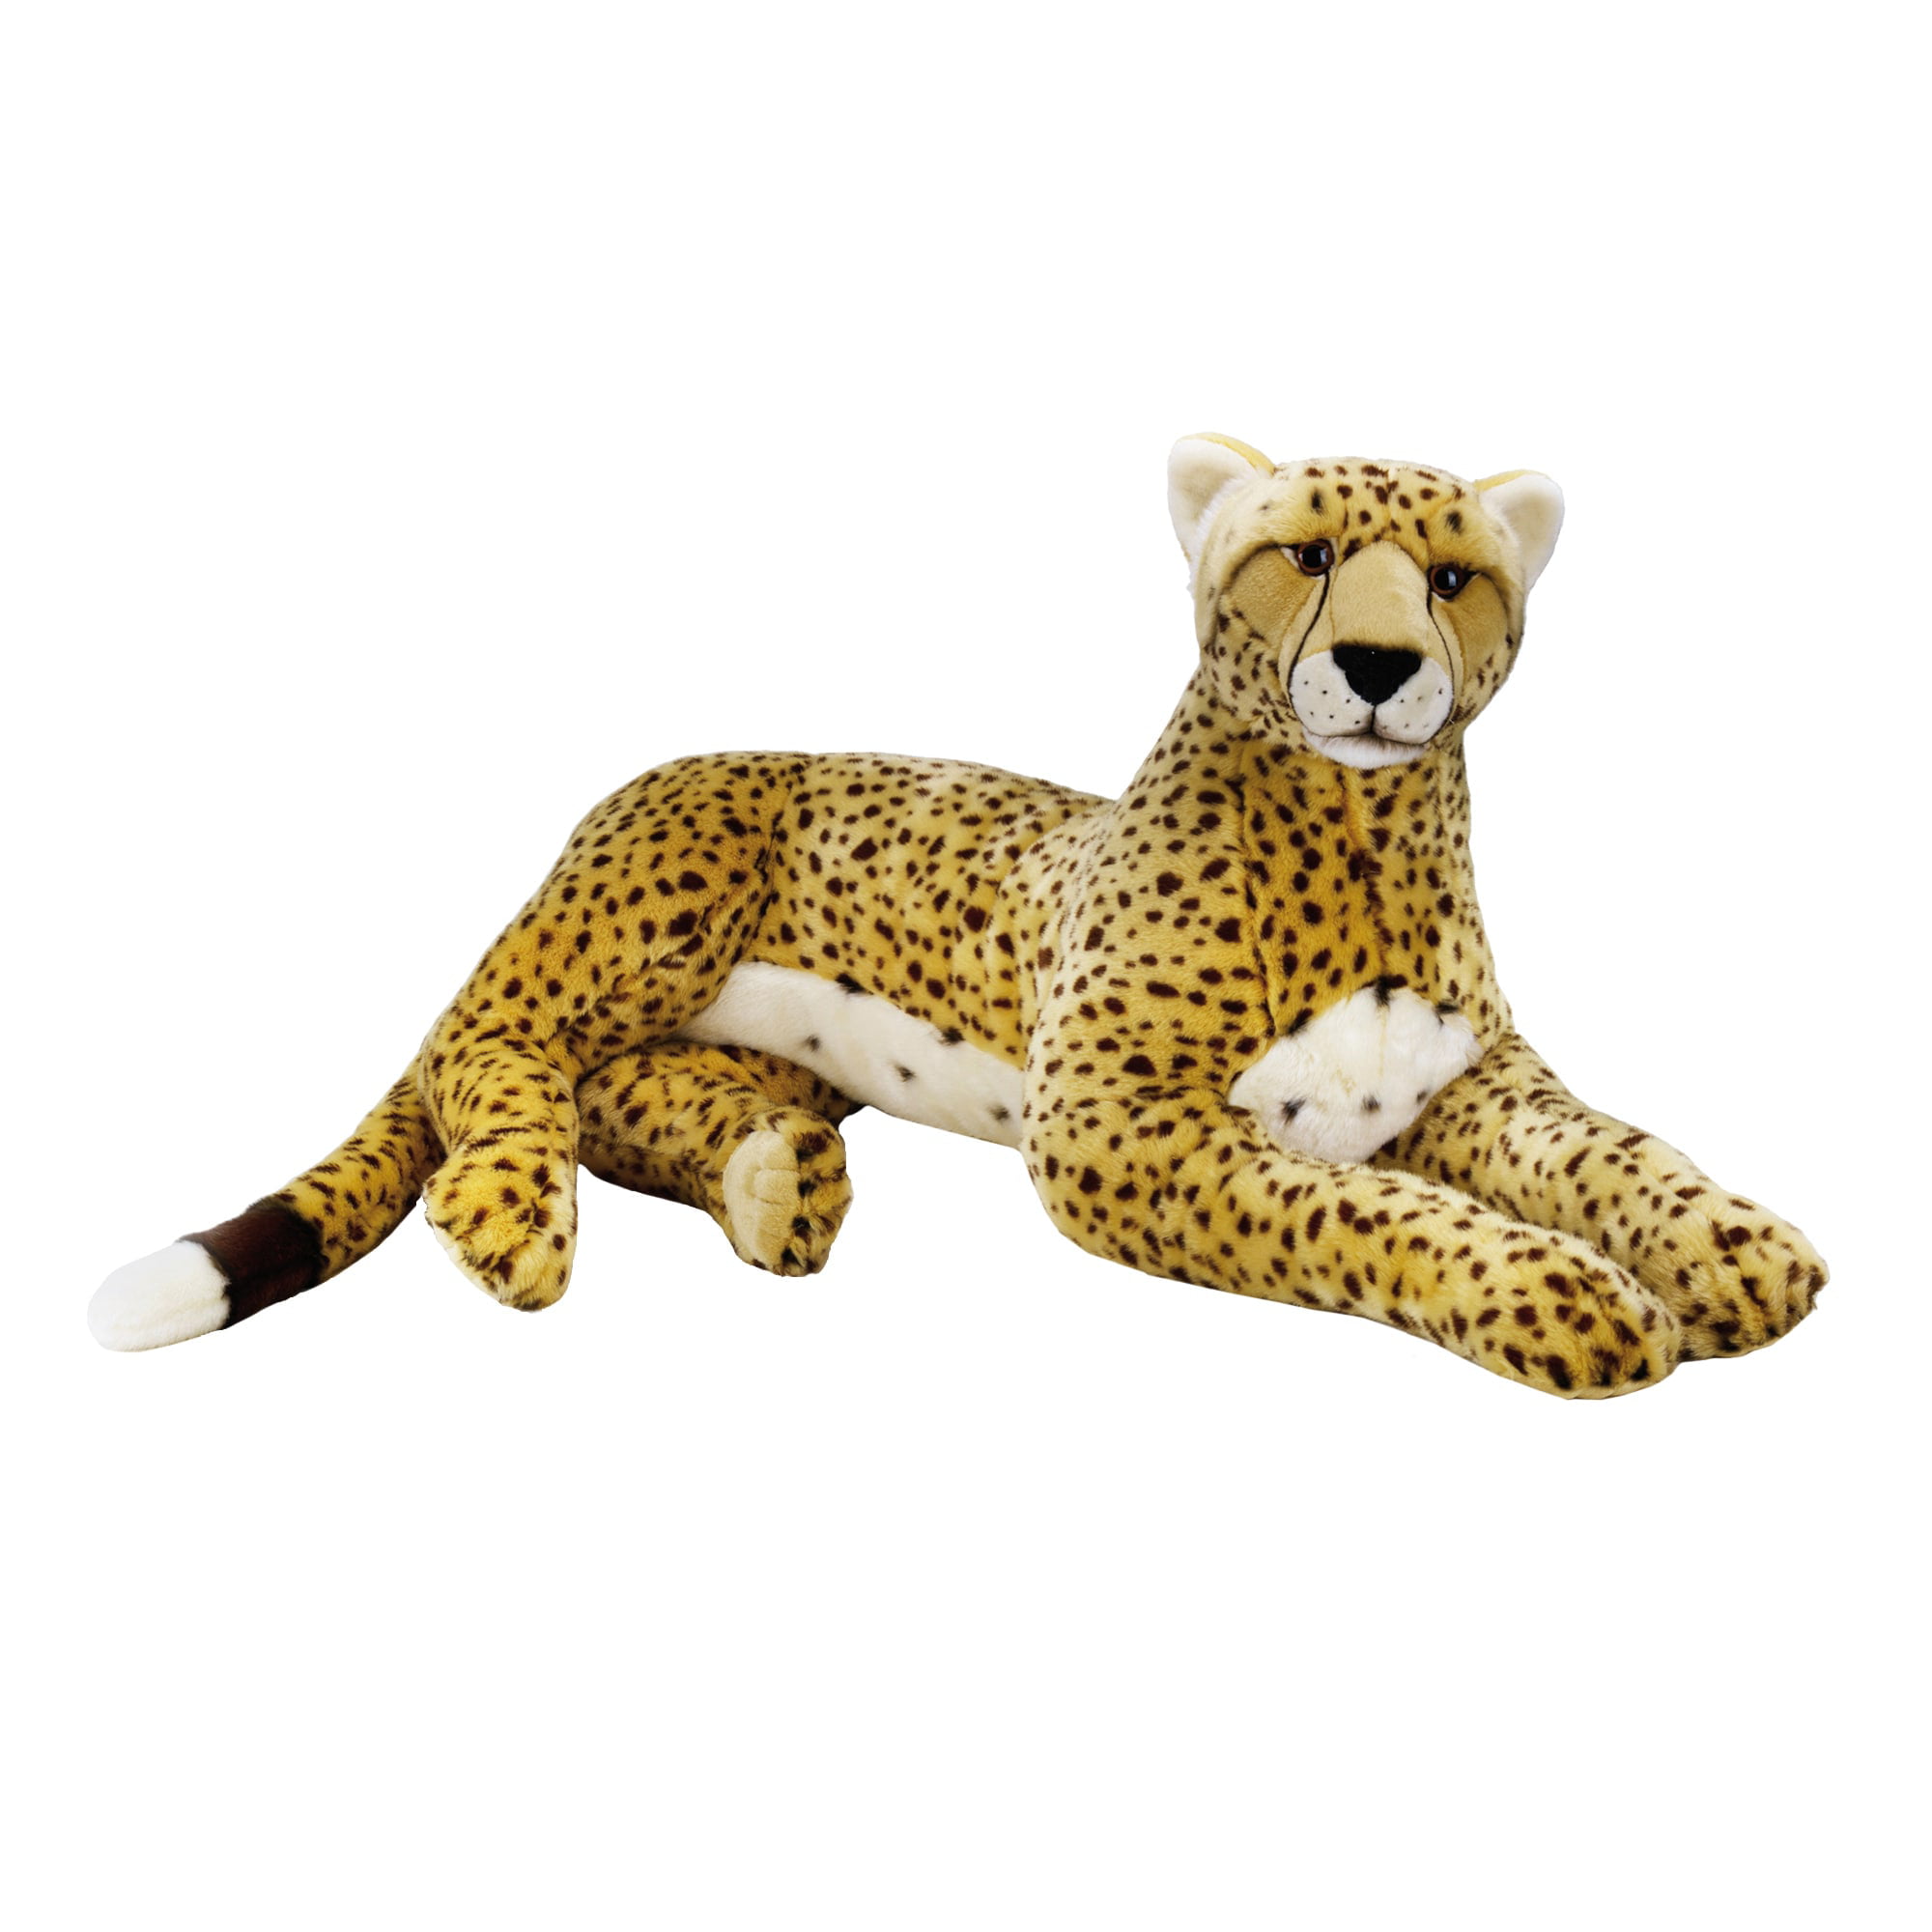 Lelly - National Geographic Plush, Giant Cheetah 